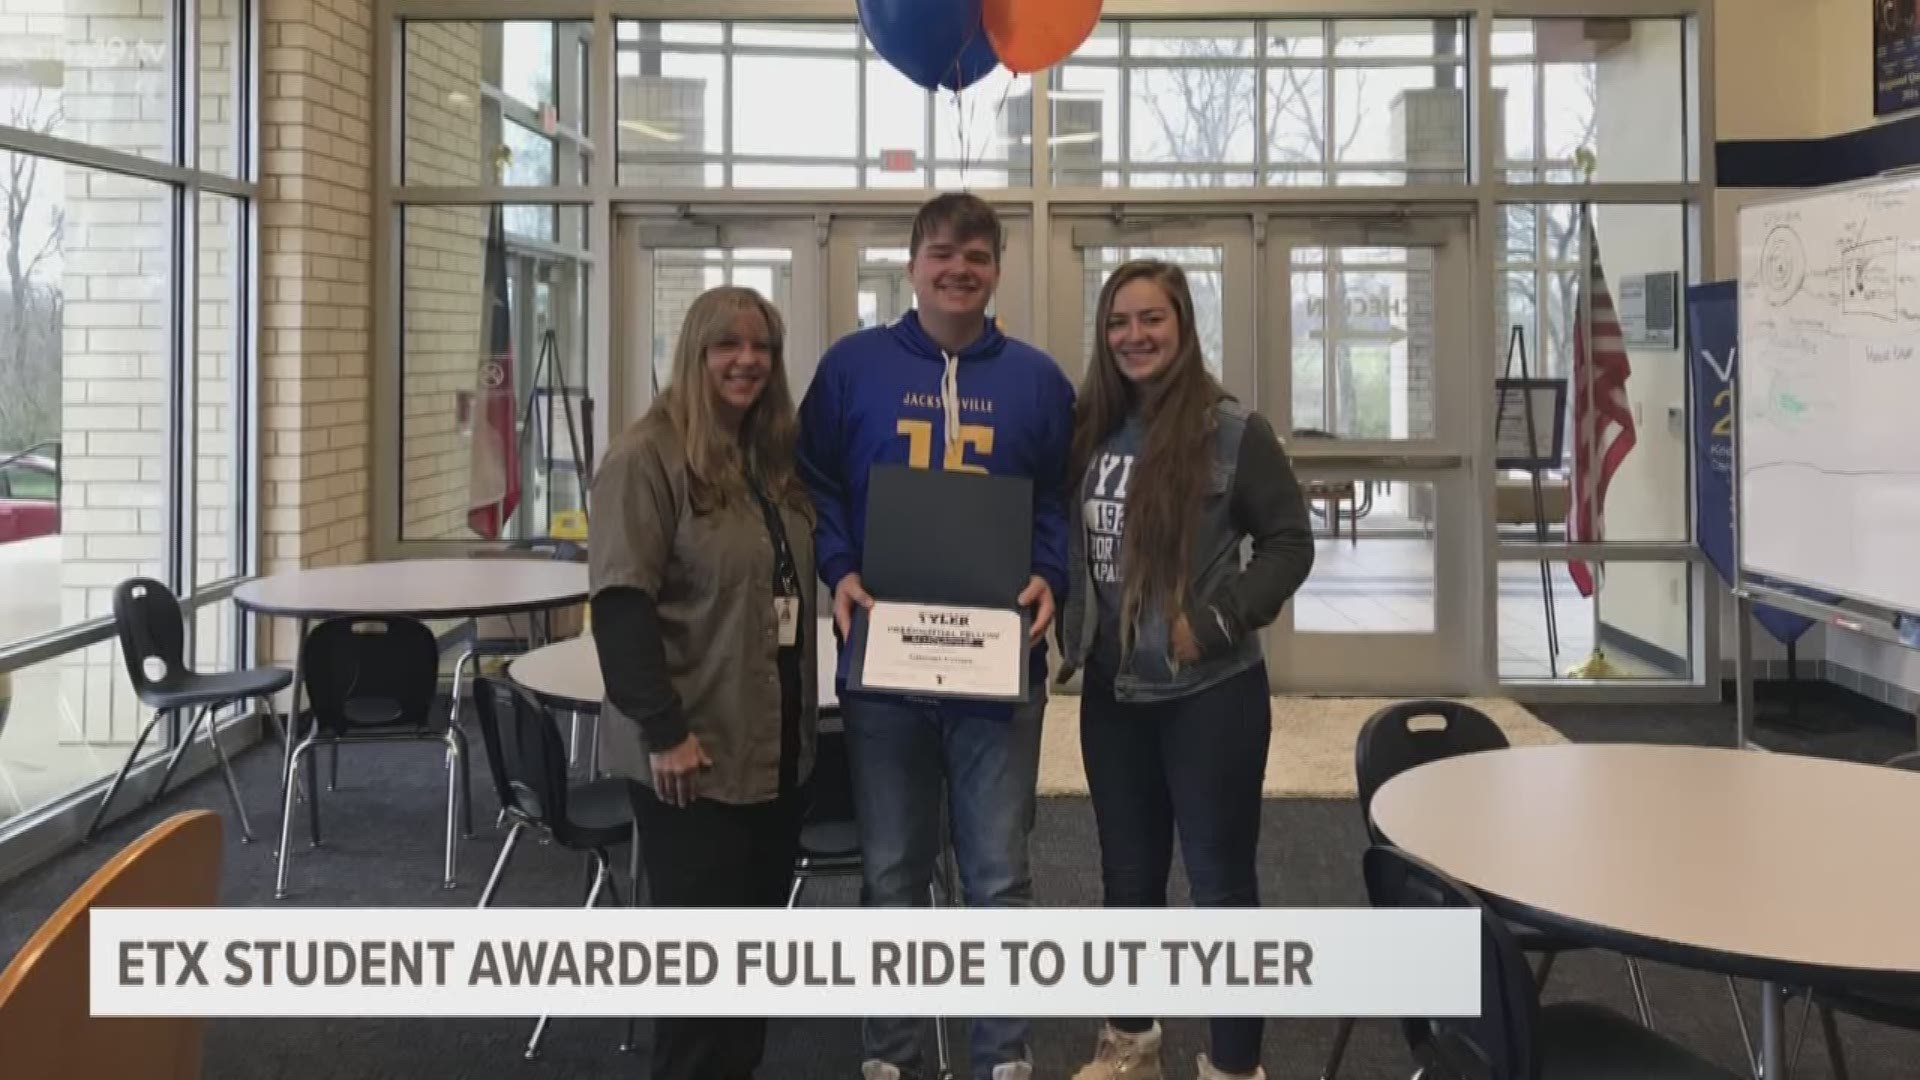 Connor Crowe received the surprise of a lifetime when he found out he received a full scholarship to UT-Tyler.